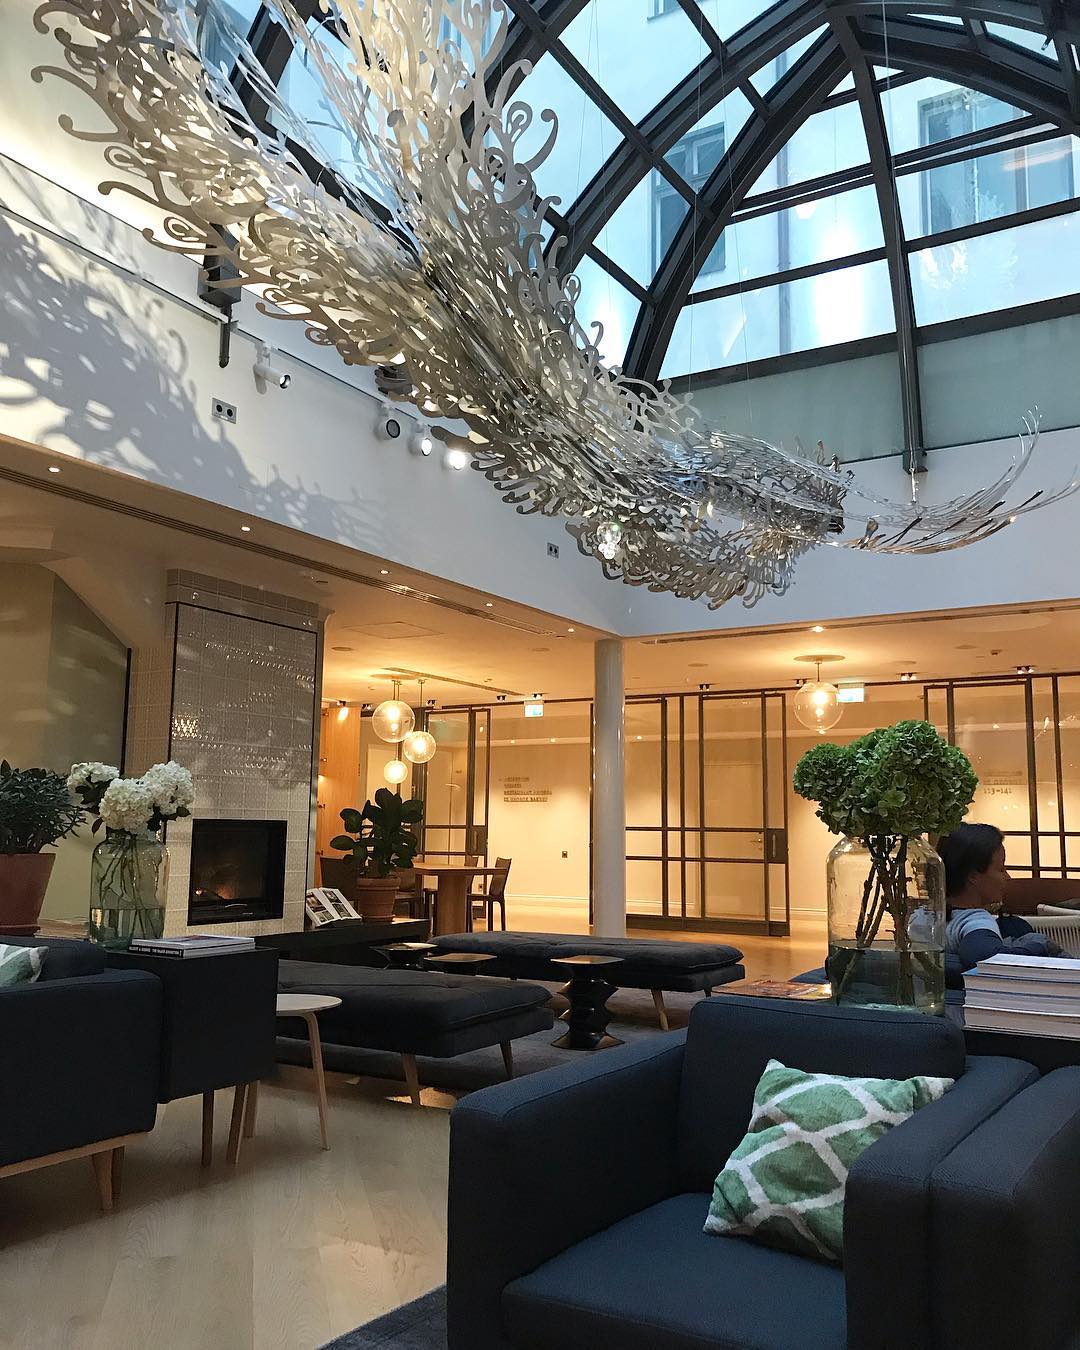 St. George’s Wintergarden exceeded all my expectations - ...